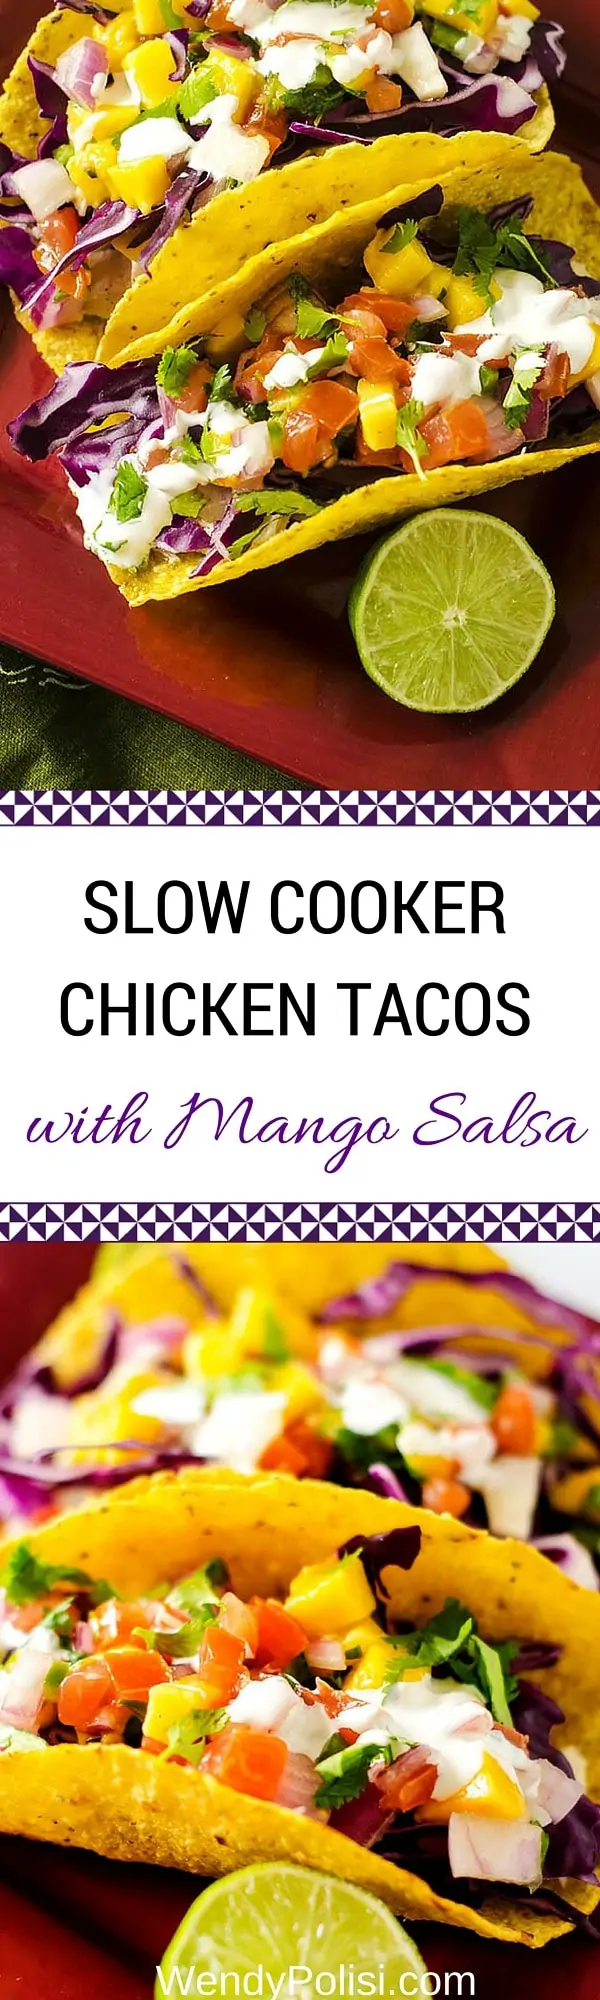 Slow Cooker Chicken Tacos with Mango Salsa